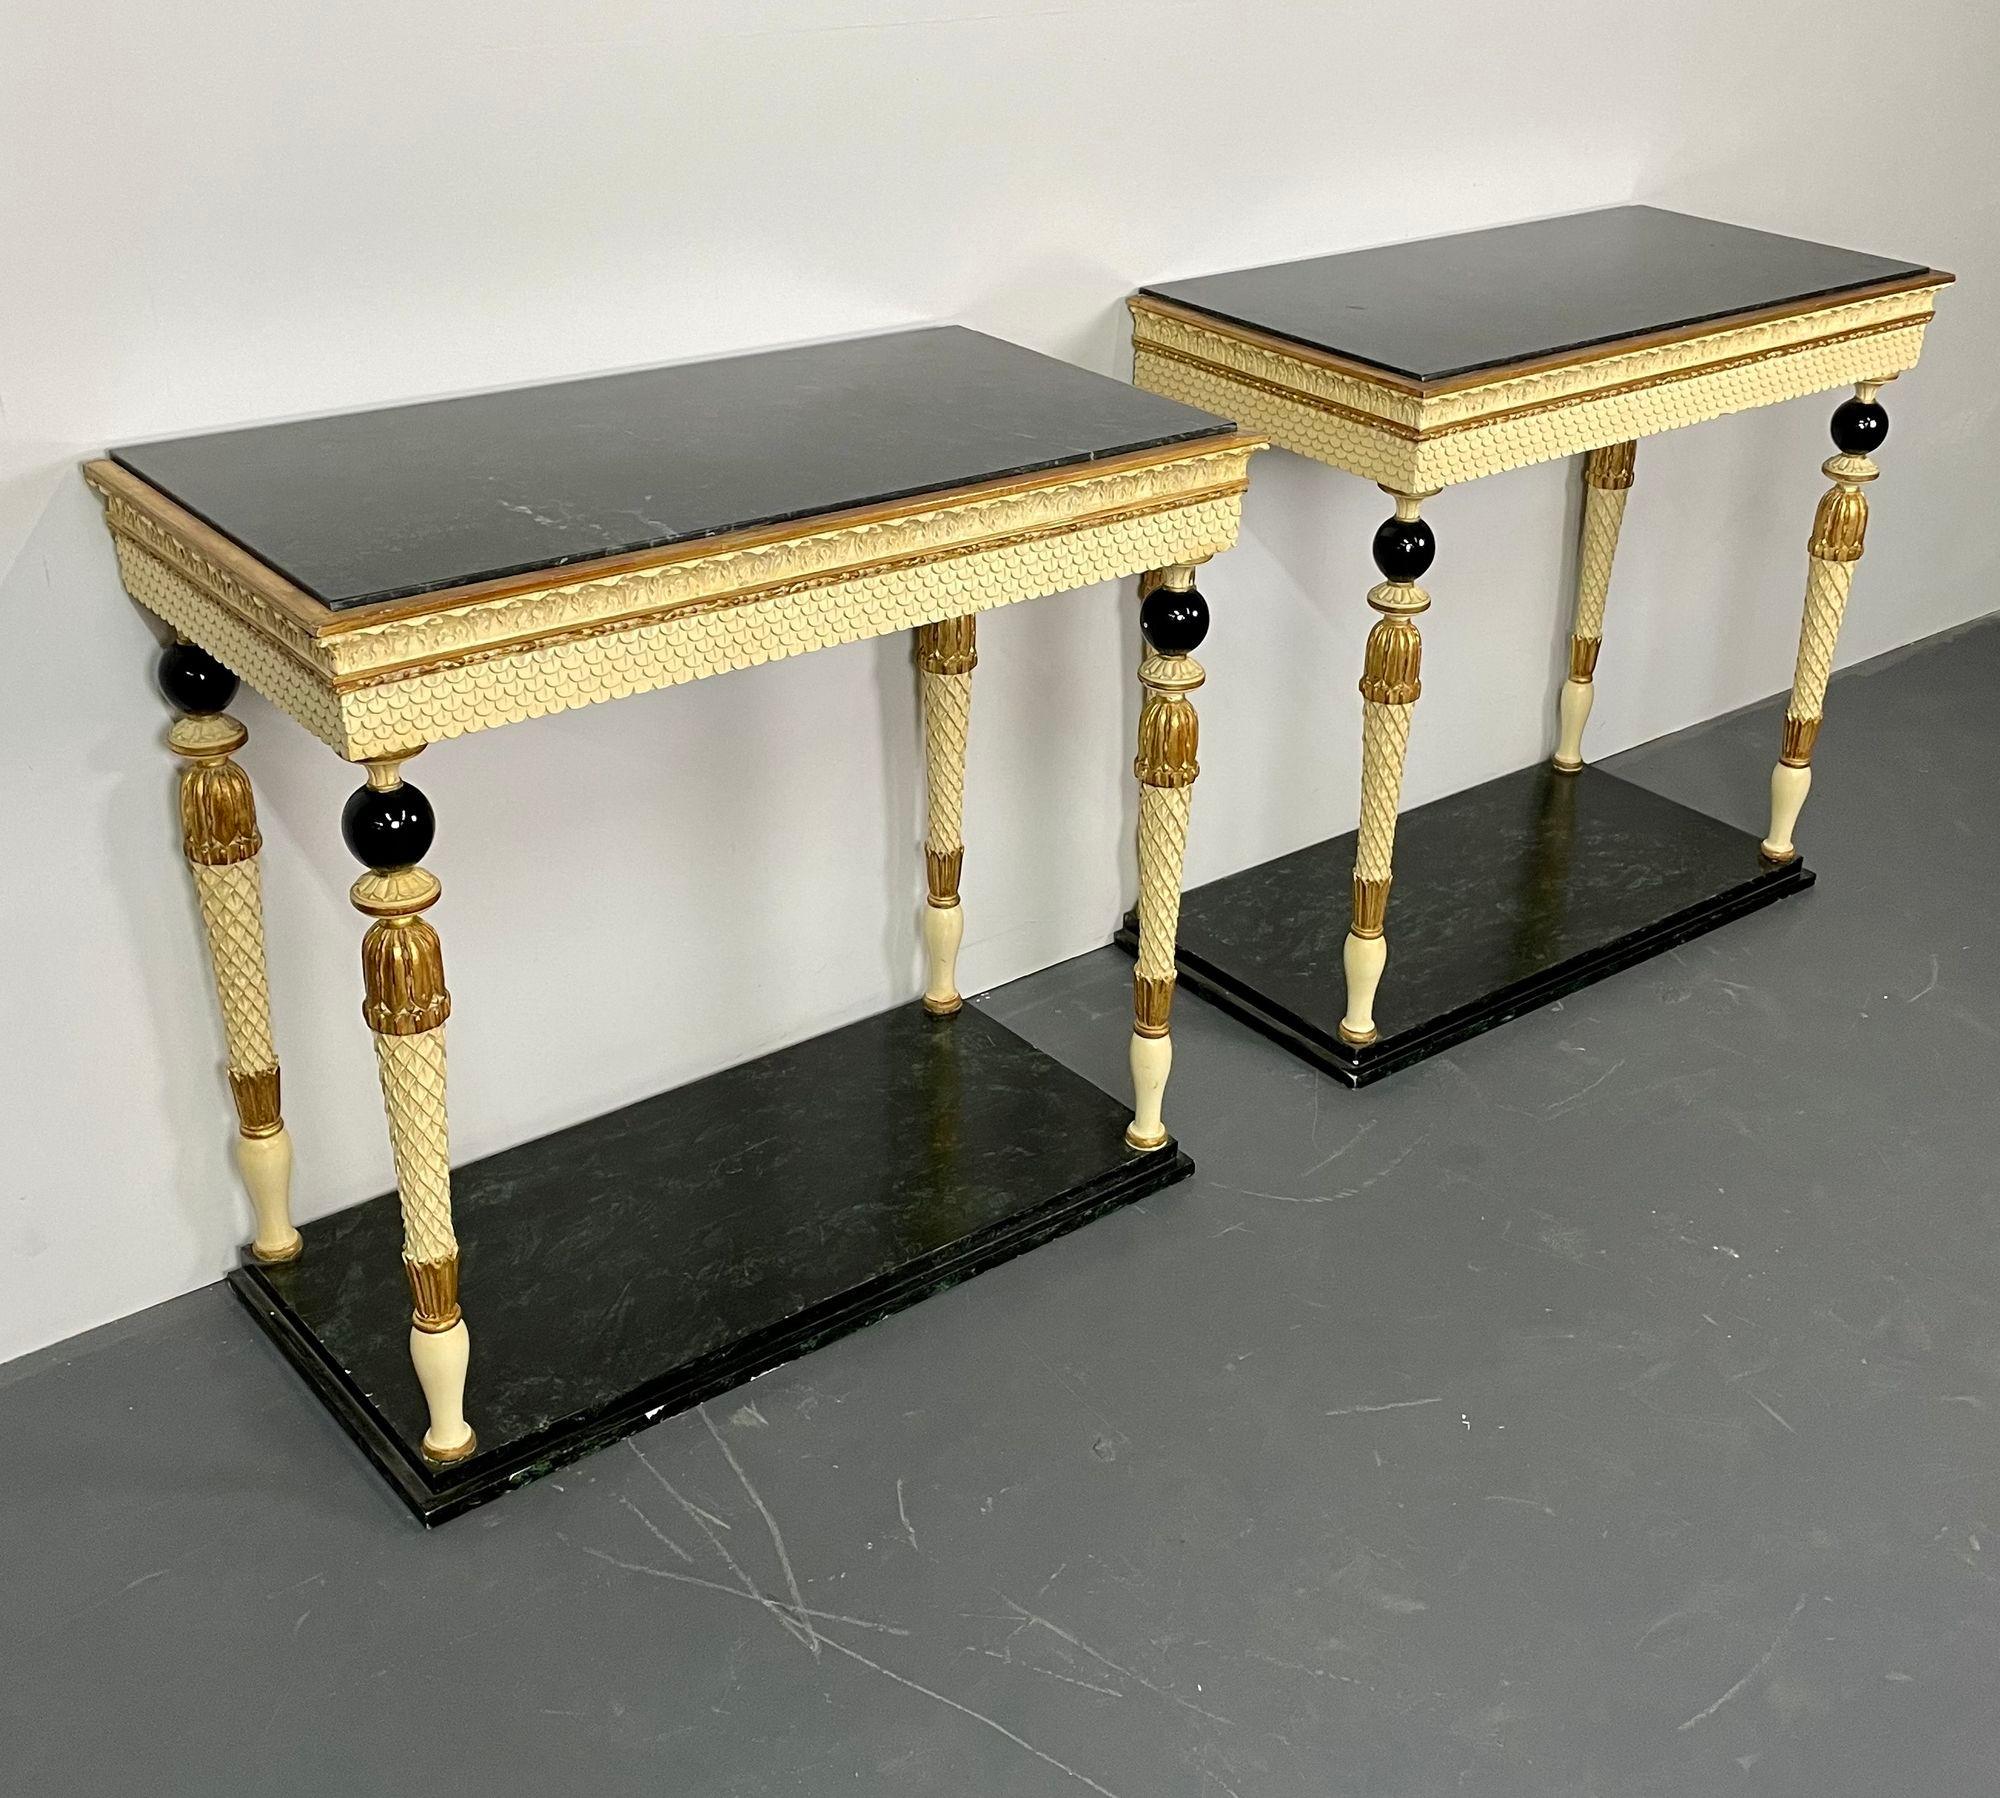 Pair of Maison Jansen console tables, Neoclassical, marble top, paint decorated
Pair of Maison Jansen console tables, Neoclassical, marble top, paint decorated Attributed to Maison Jansen as seen on page 201, of the Jansen Furniture book by James